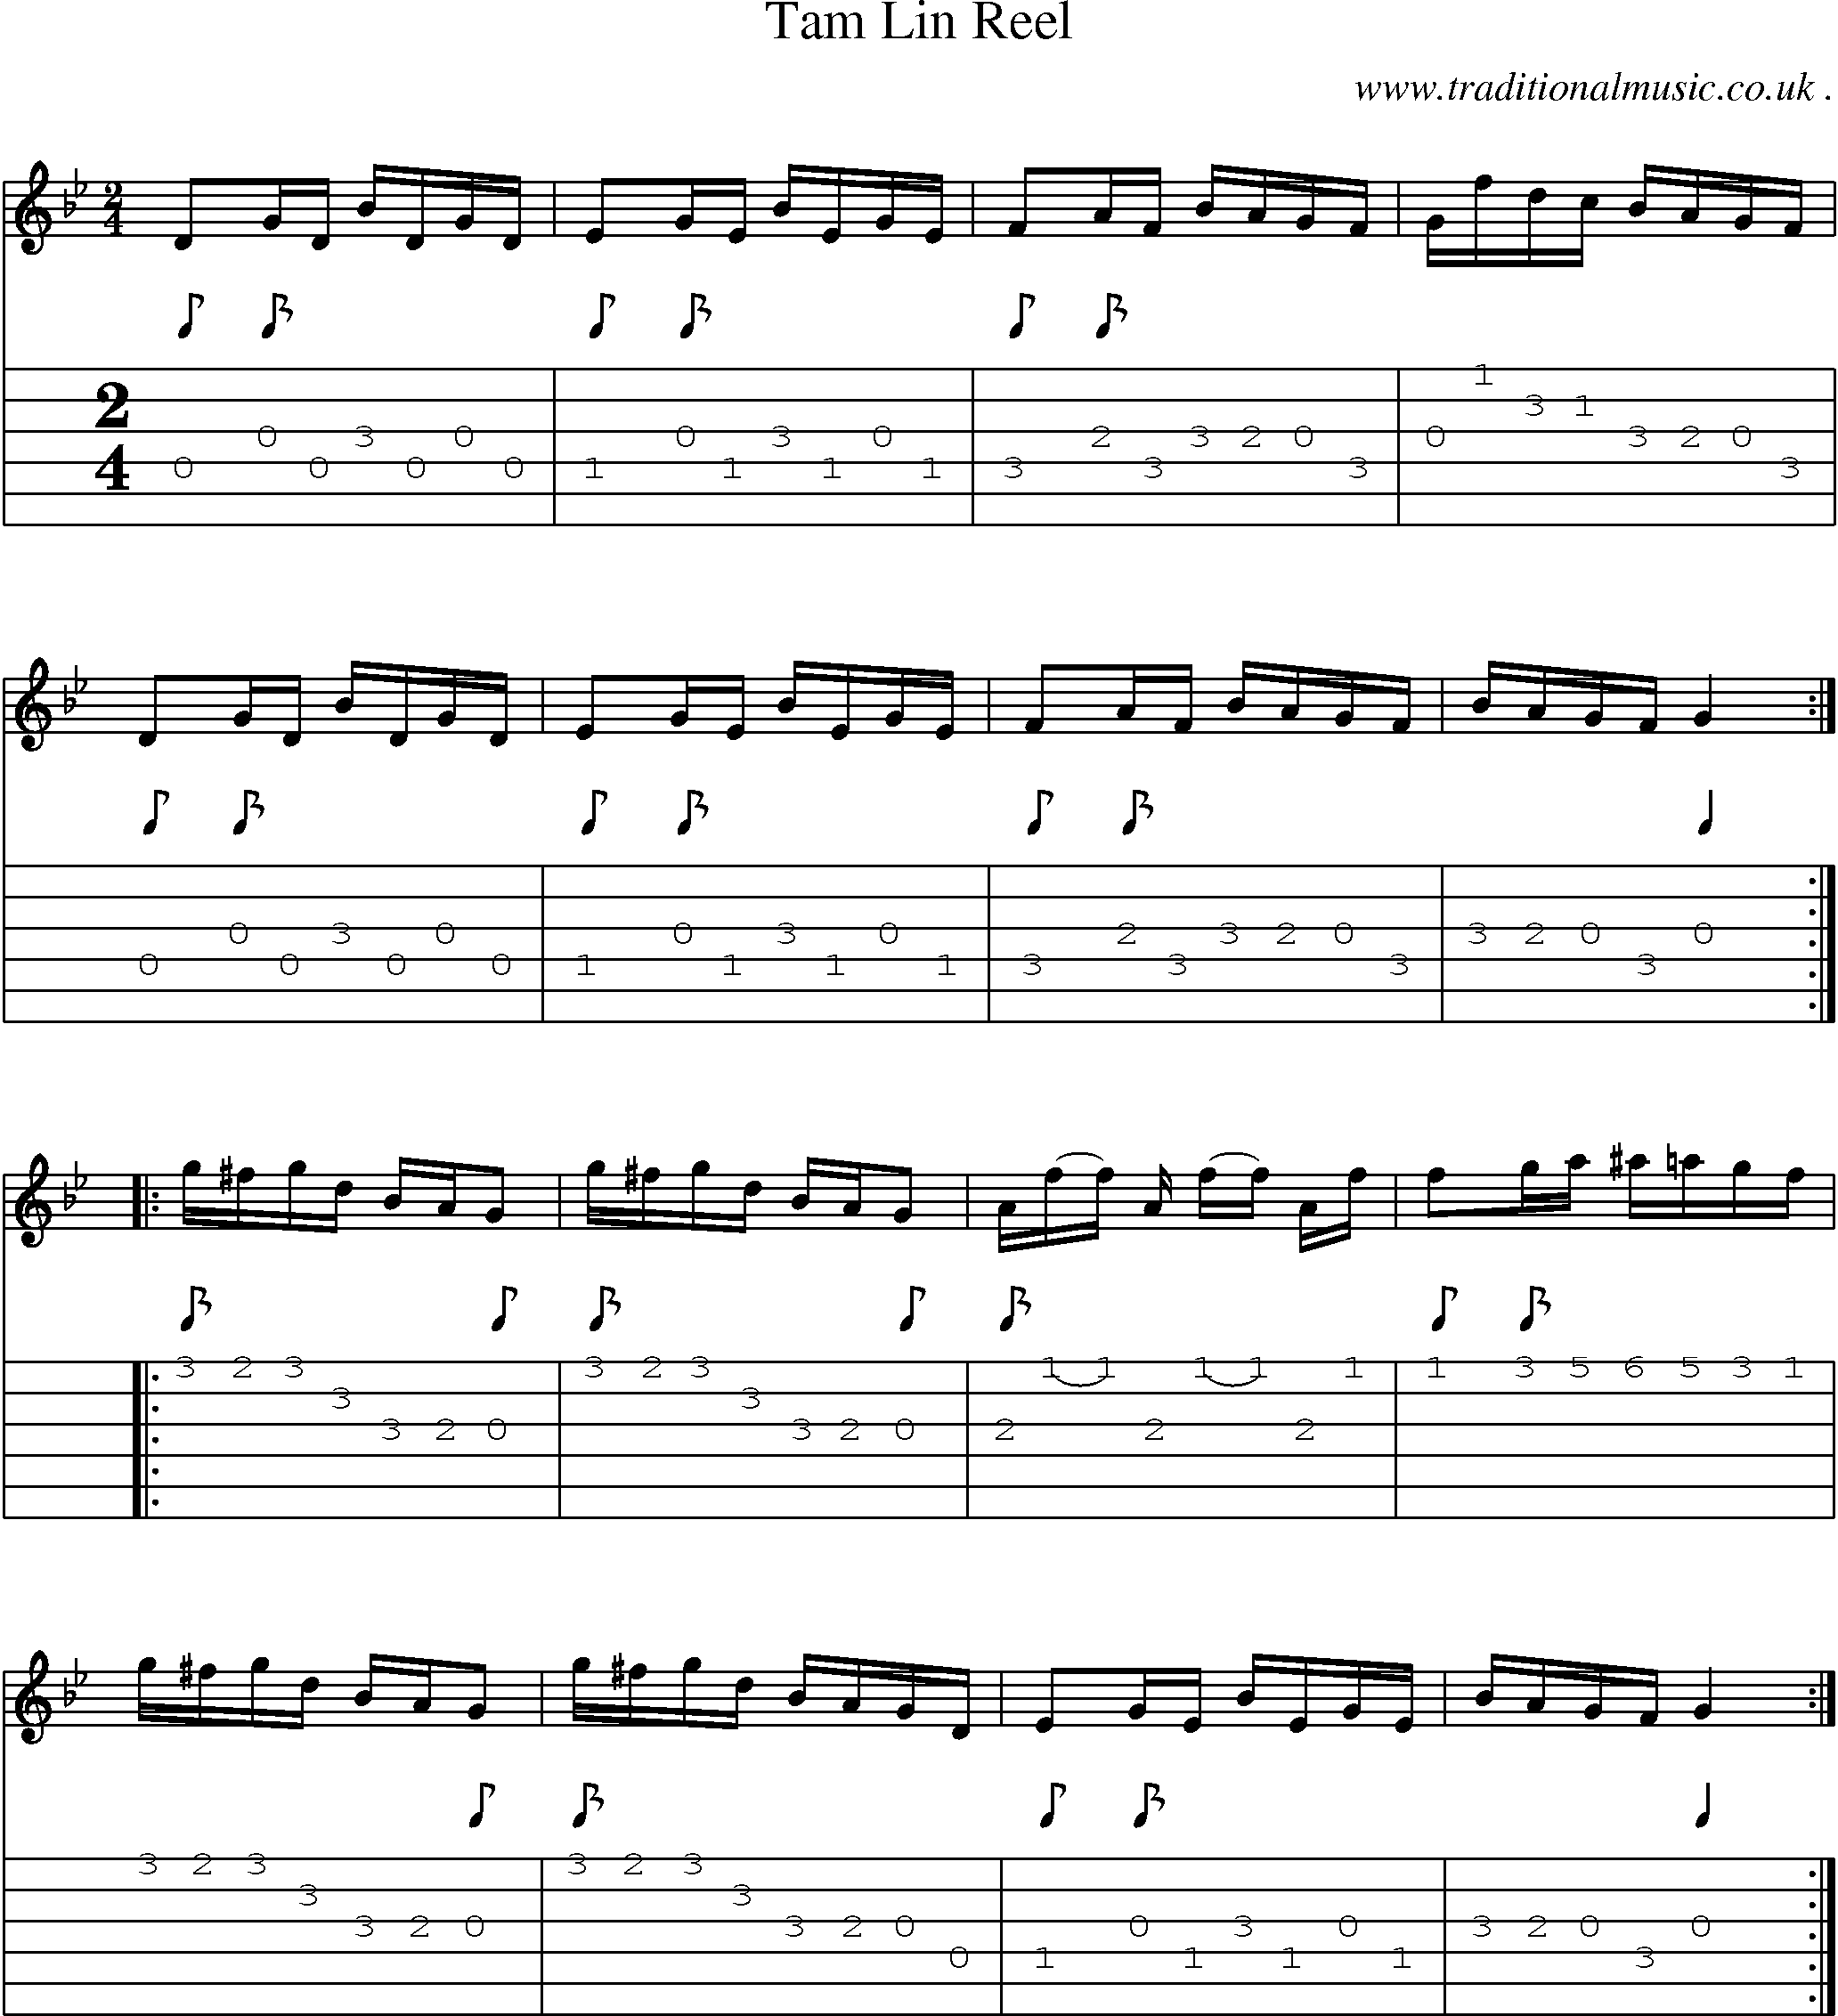 Sheet-Music and Guitar Tabs for Tam Lin Reel